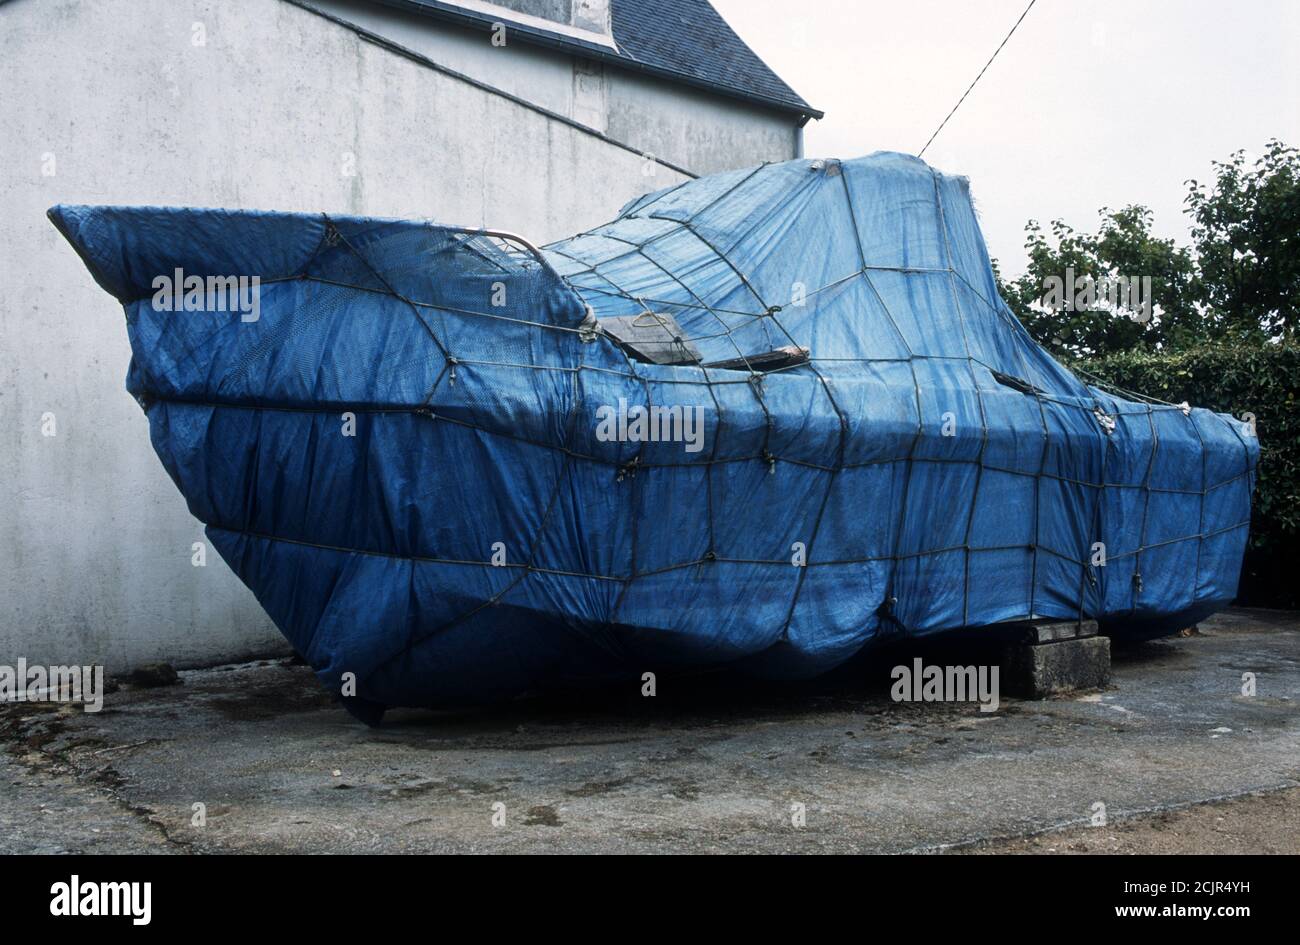 Motorboat wrapped up in blue plastic covering Stock Photo